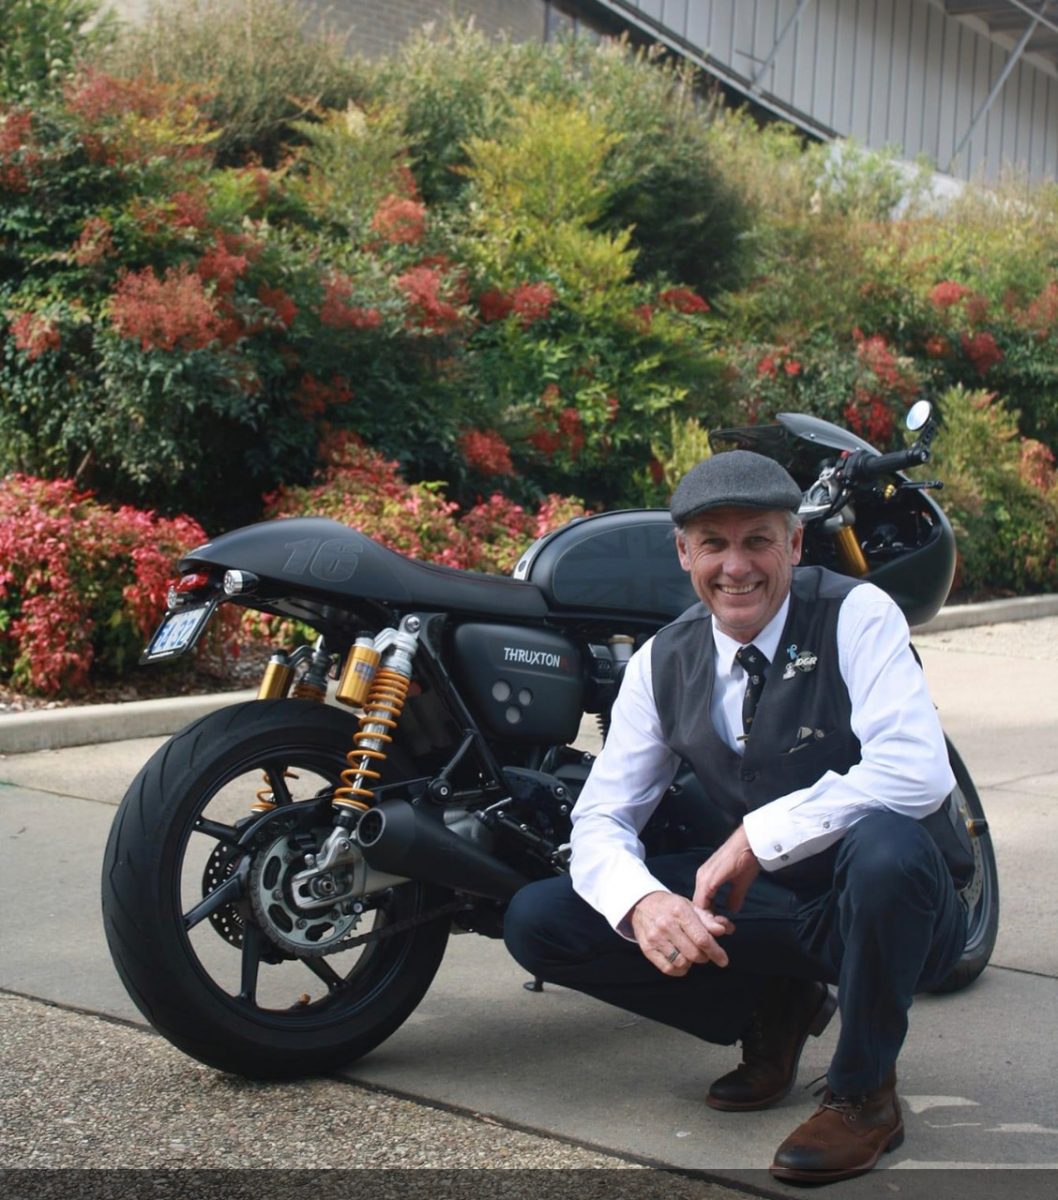 Simon Whitaker crouched near his bike for The Distinguished Gentleman's Ride